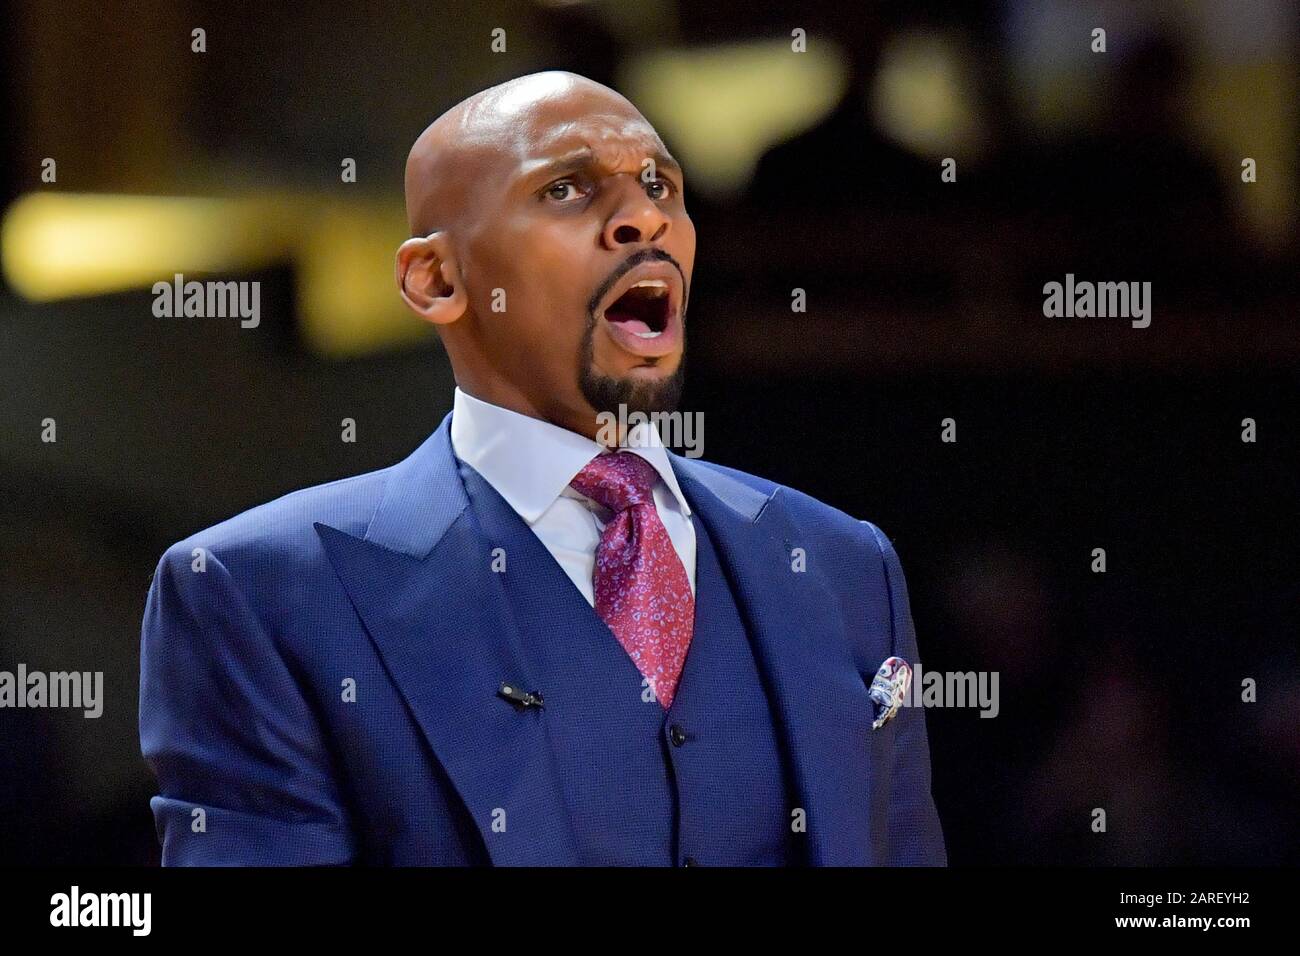 Vanderbilt Commodores head coach Jerry Stackhouse during the first half against the Alabama Crimson Tide of an NCAA SEC basketball game at Memorial Gym. Wednesday, Jan 22, 2020, in Nashville.  Alabama defeated Vanderbilt 77-62. (Photo by IOS/ESPA-Images) Stock Photo